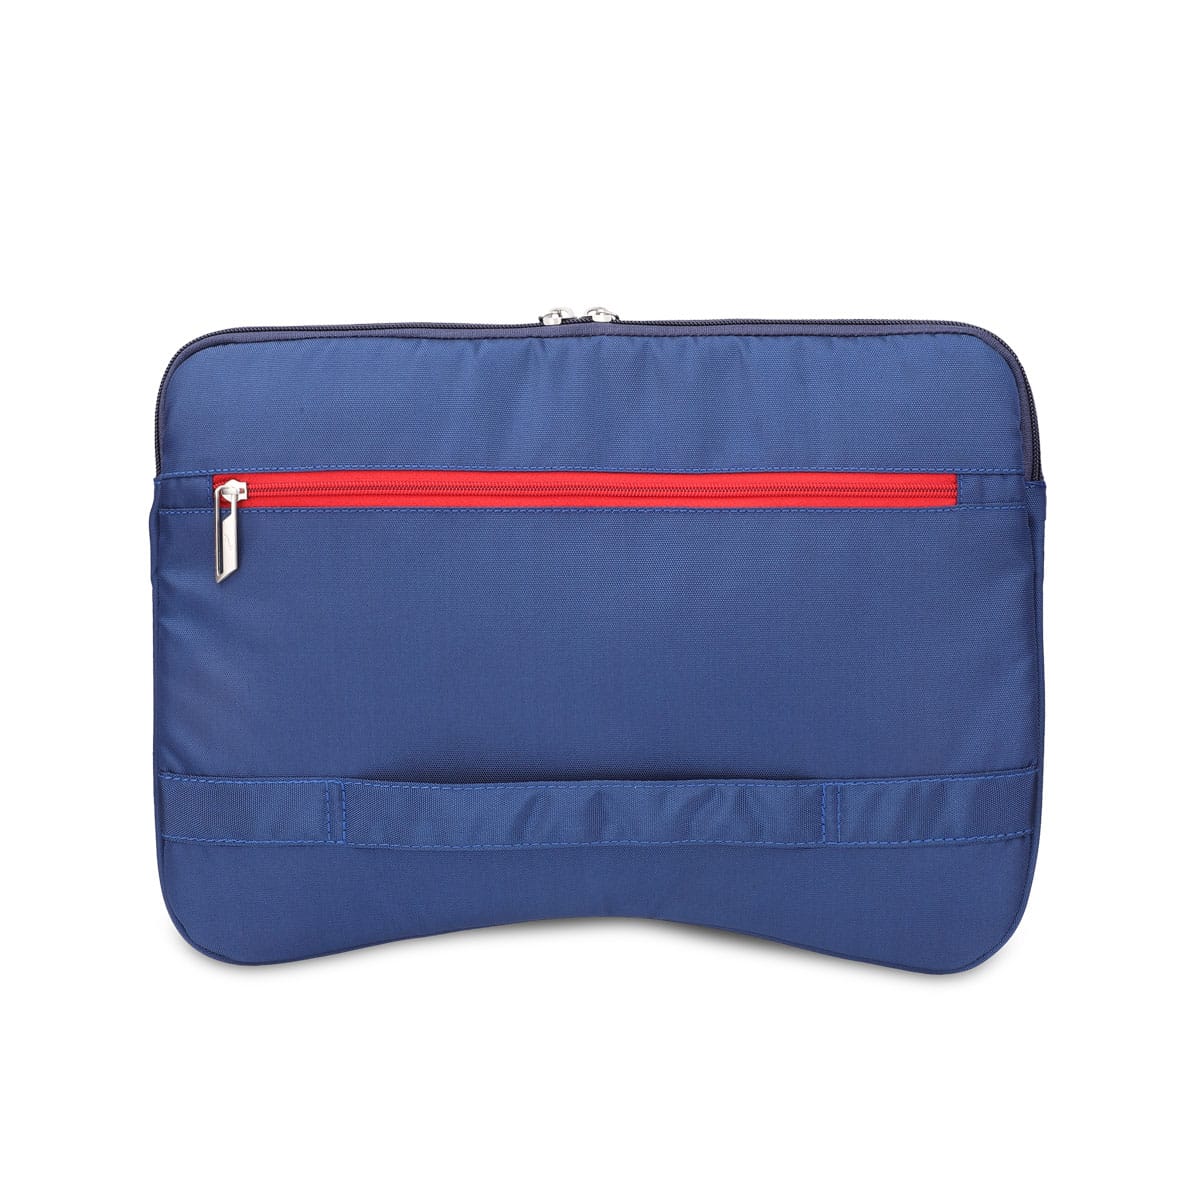 Navy-Red, Enigma Laptop Sleeve-3